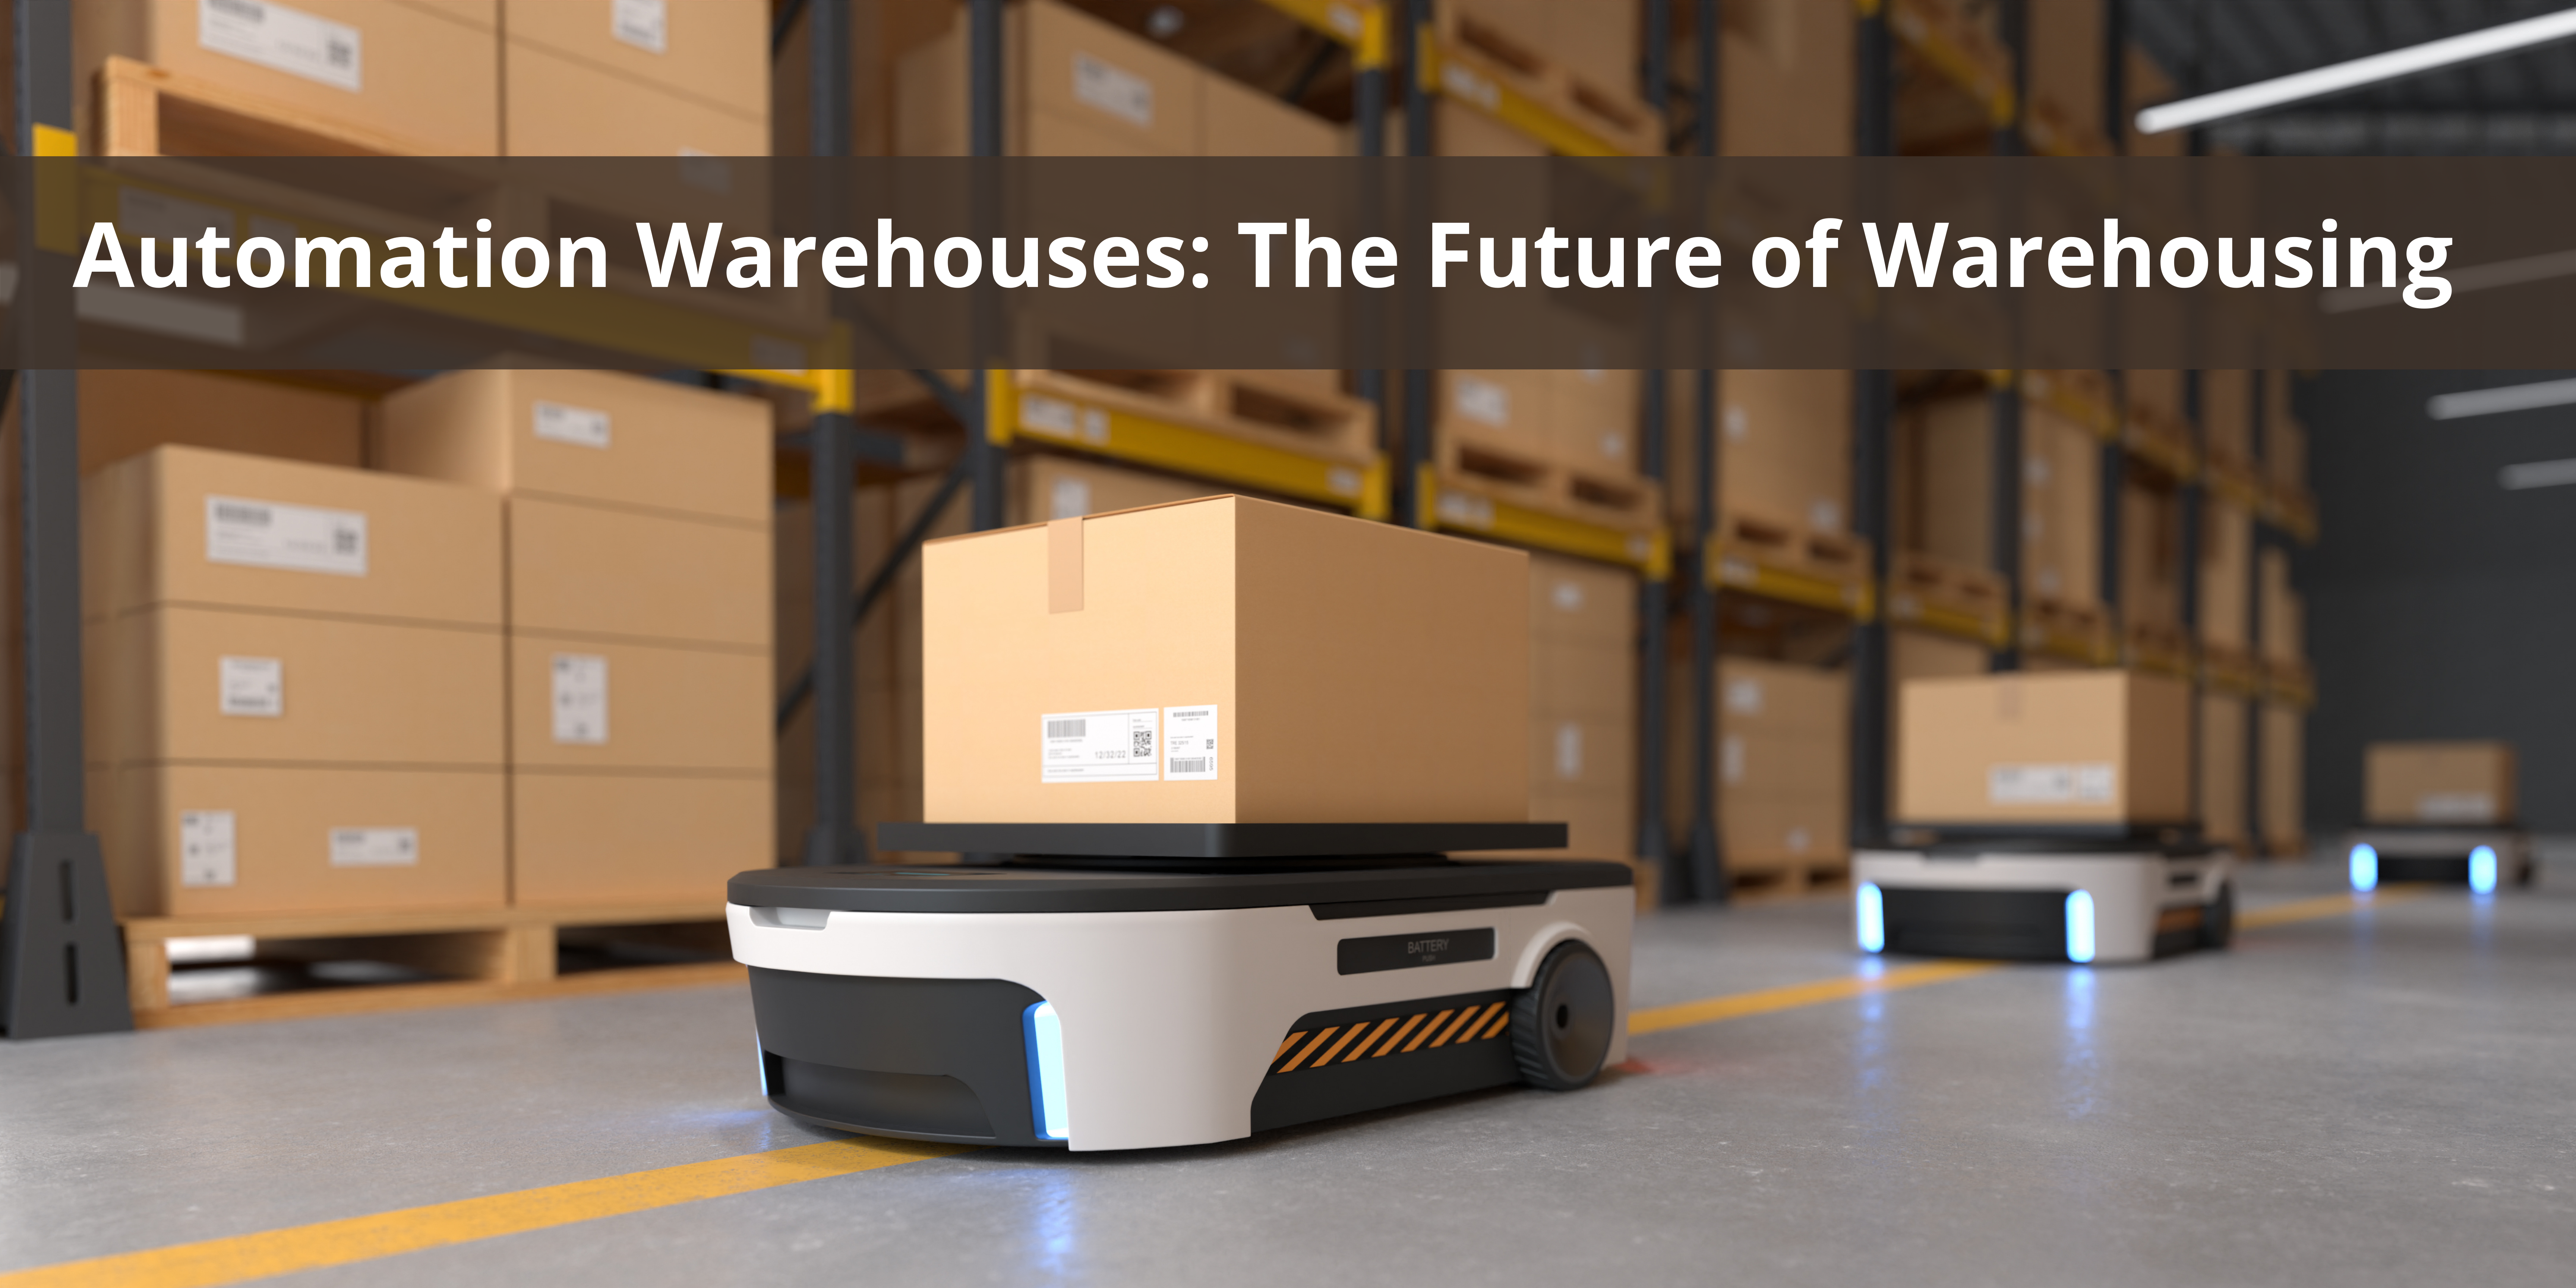 Automation Warehouses: The Future of Warehousing